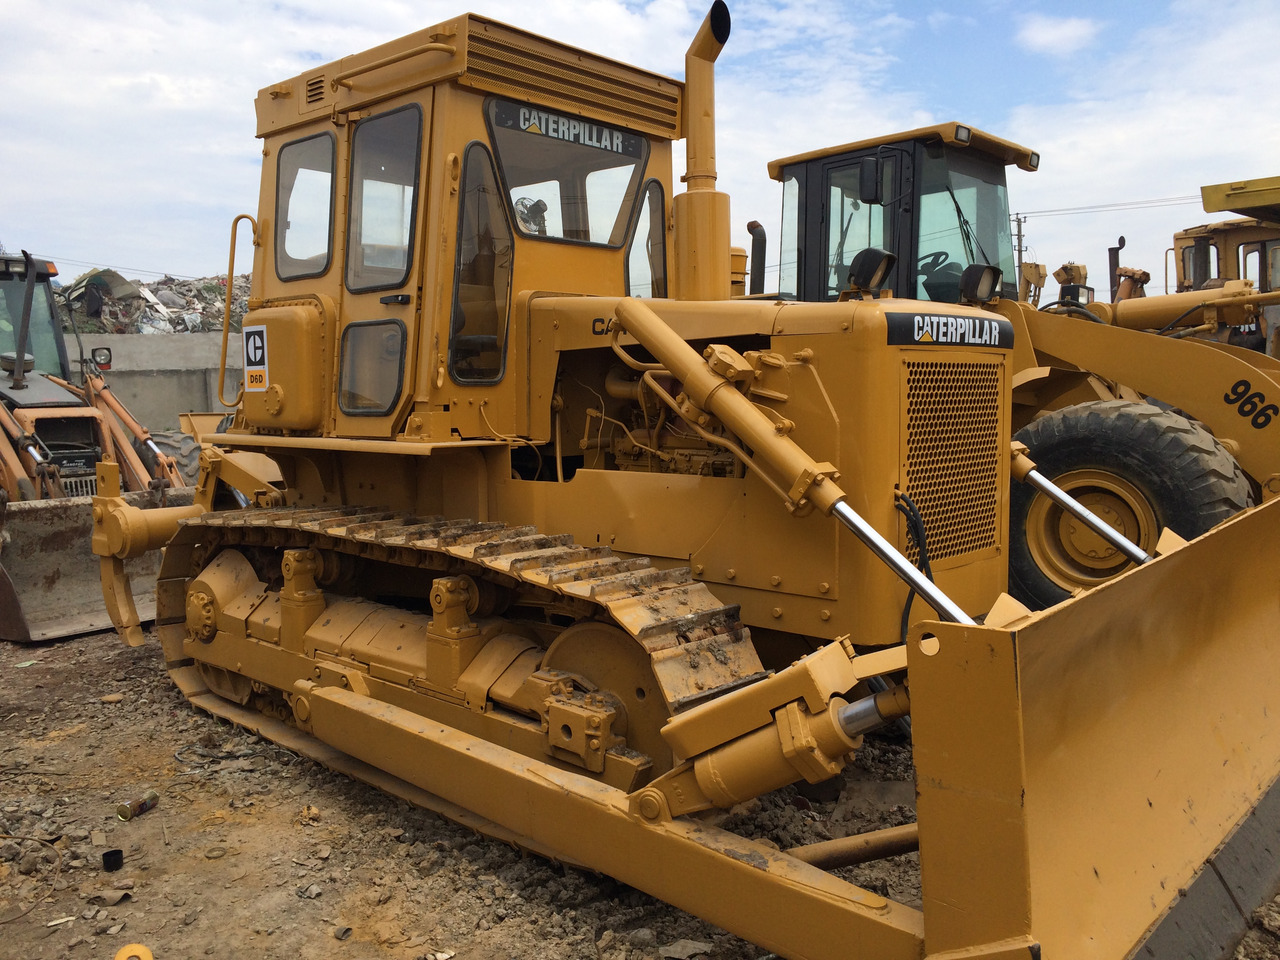 Ny Bulldozer Famous brand CATERPILLAR used D6D in  good condition for sale: bilde 6